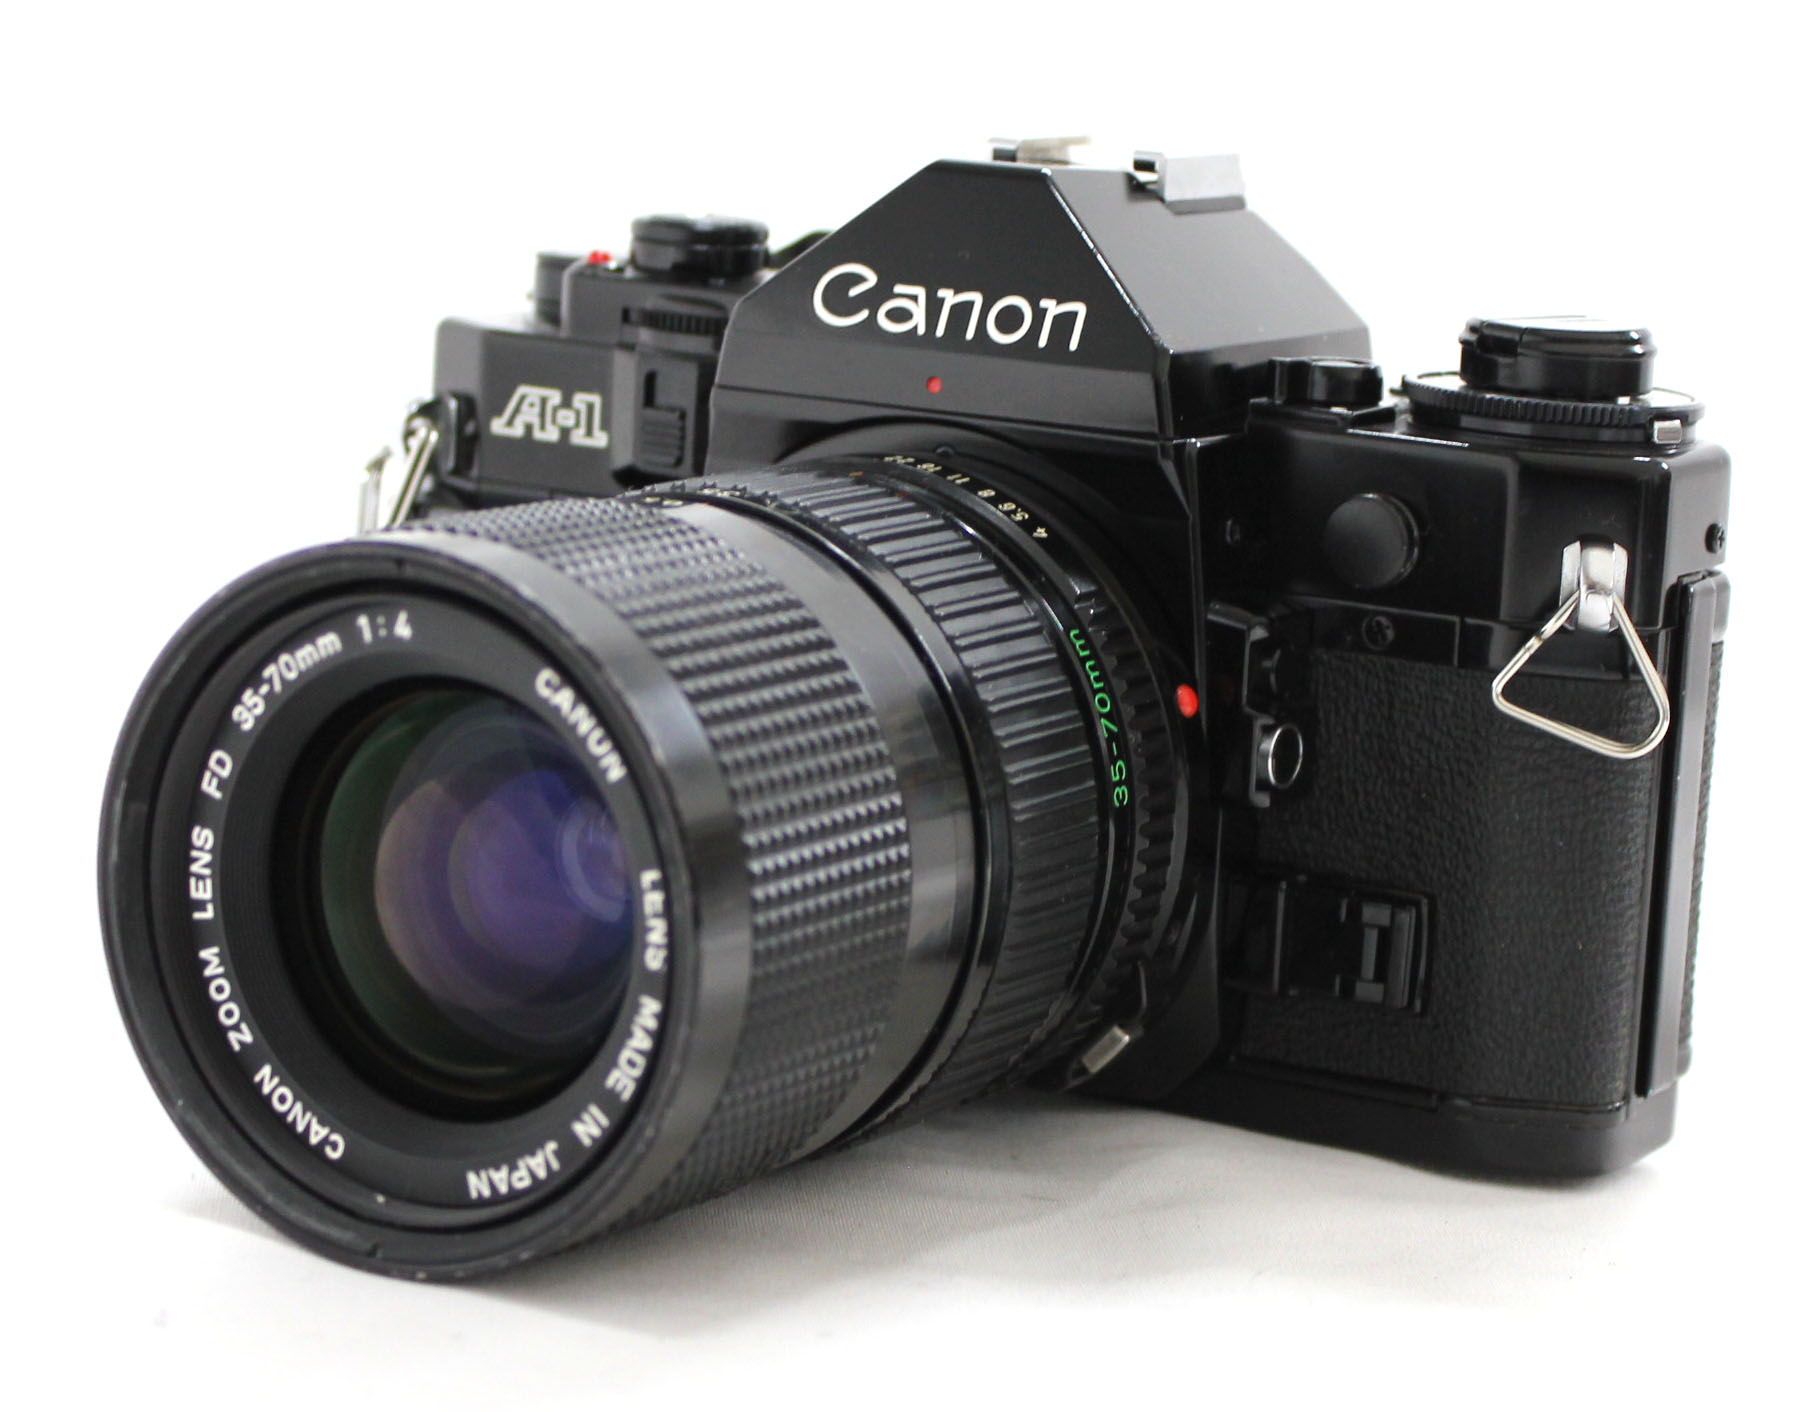  Canon A-1 35mm SLR Film Camera with New FD 35-70mm F/4 Zoom Lens from Japan Photo 0